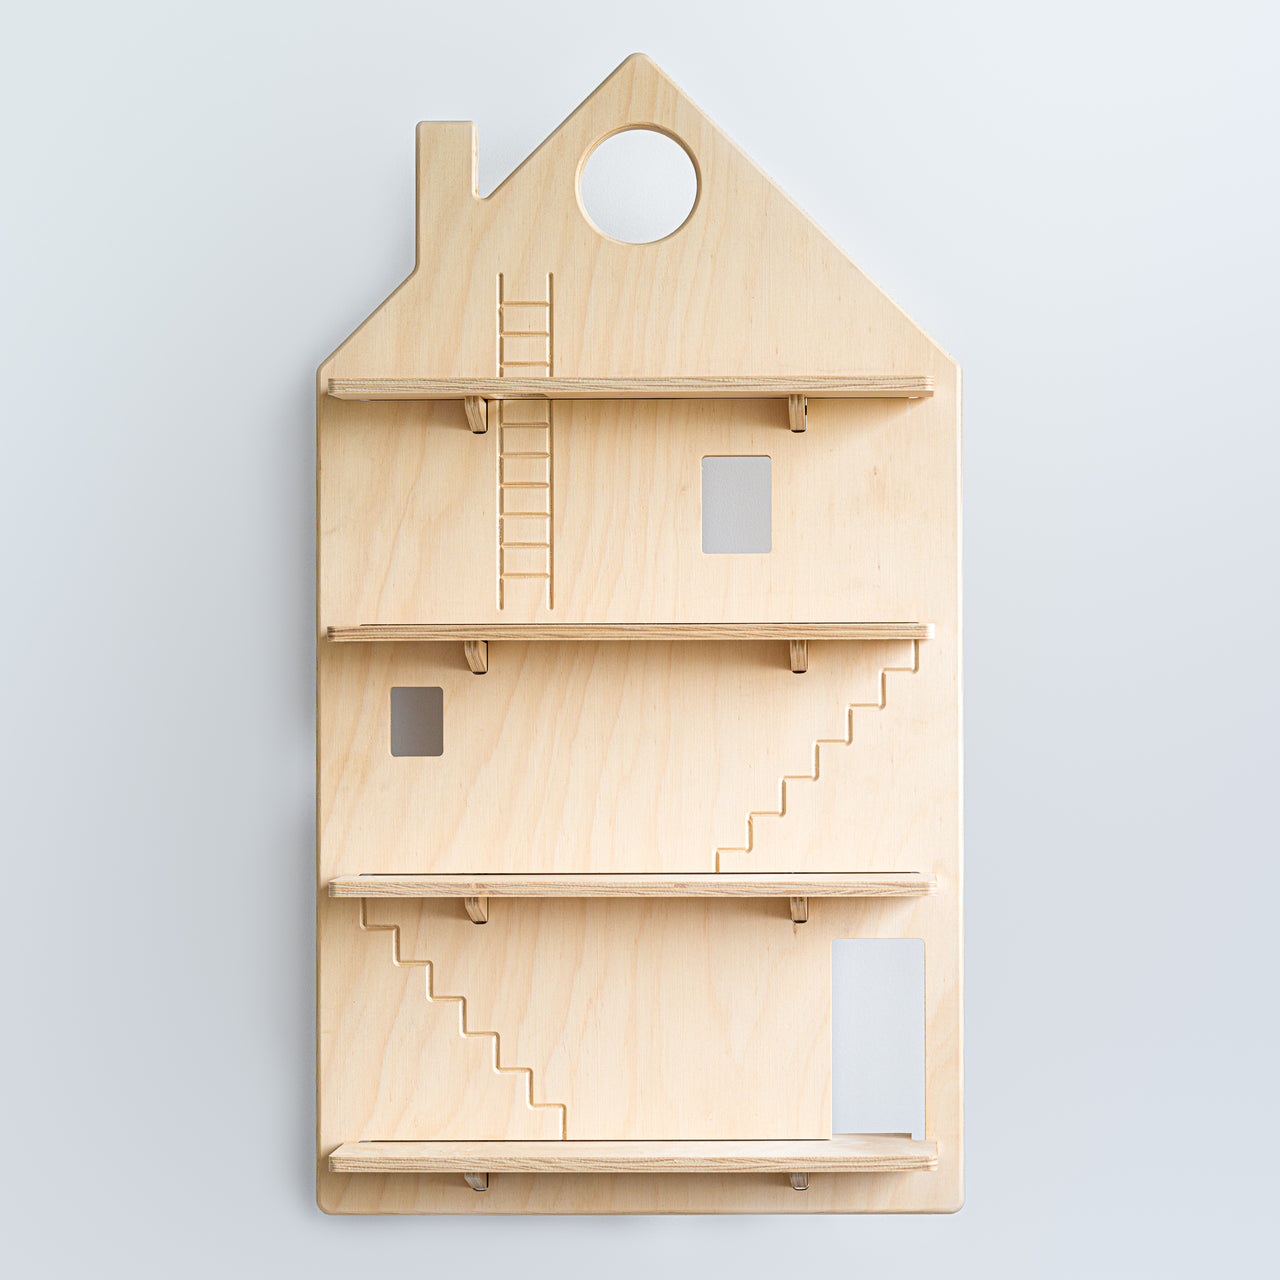 Play House Shelf – Wooden Hanging Wall - MIDMINI - Plywood Furniture